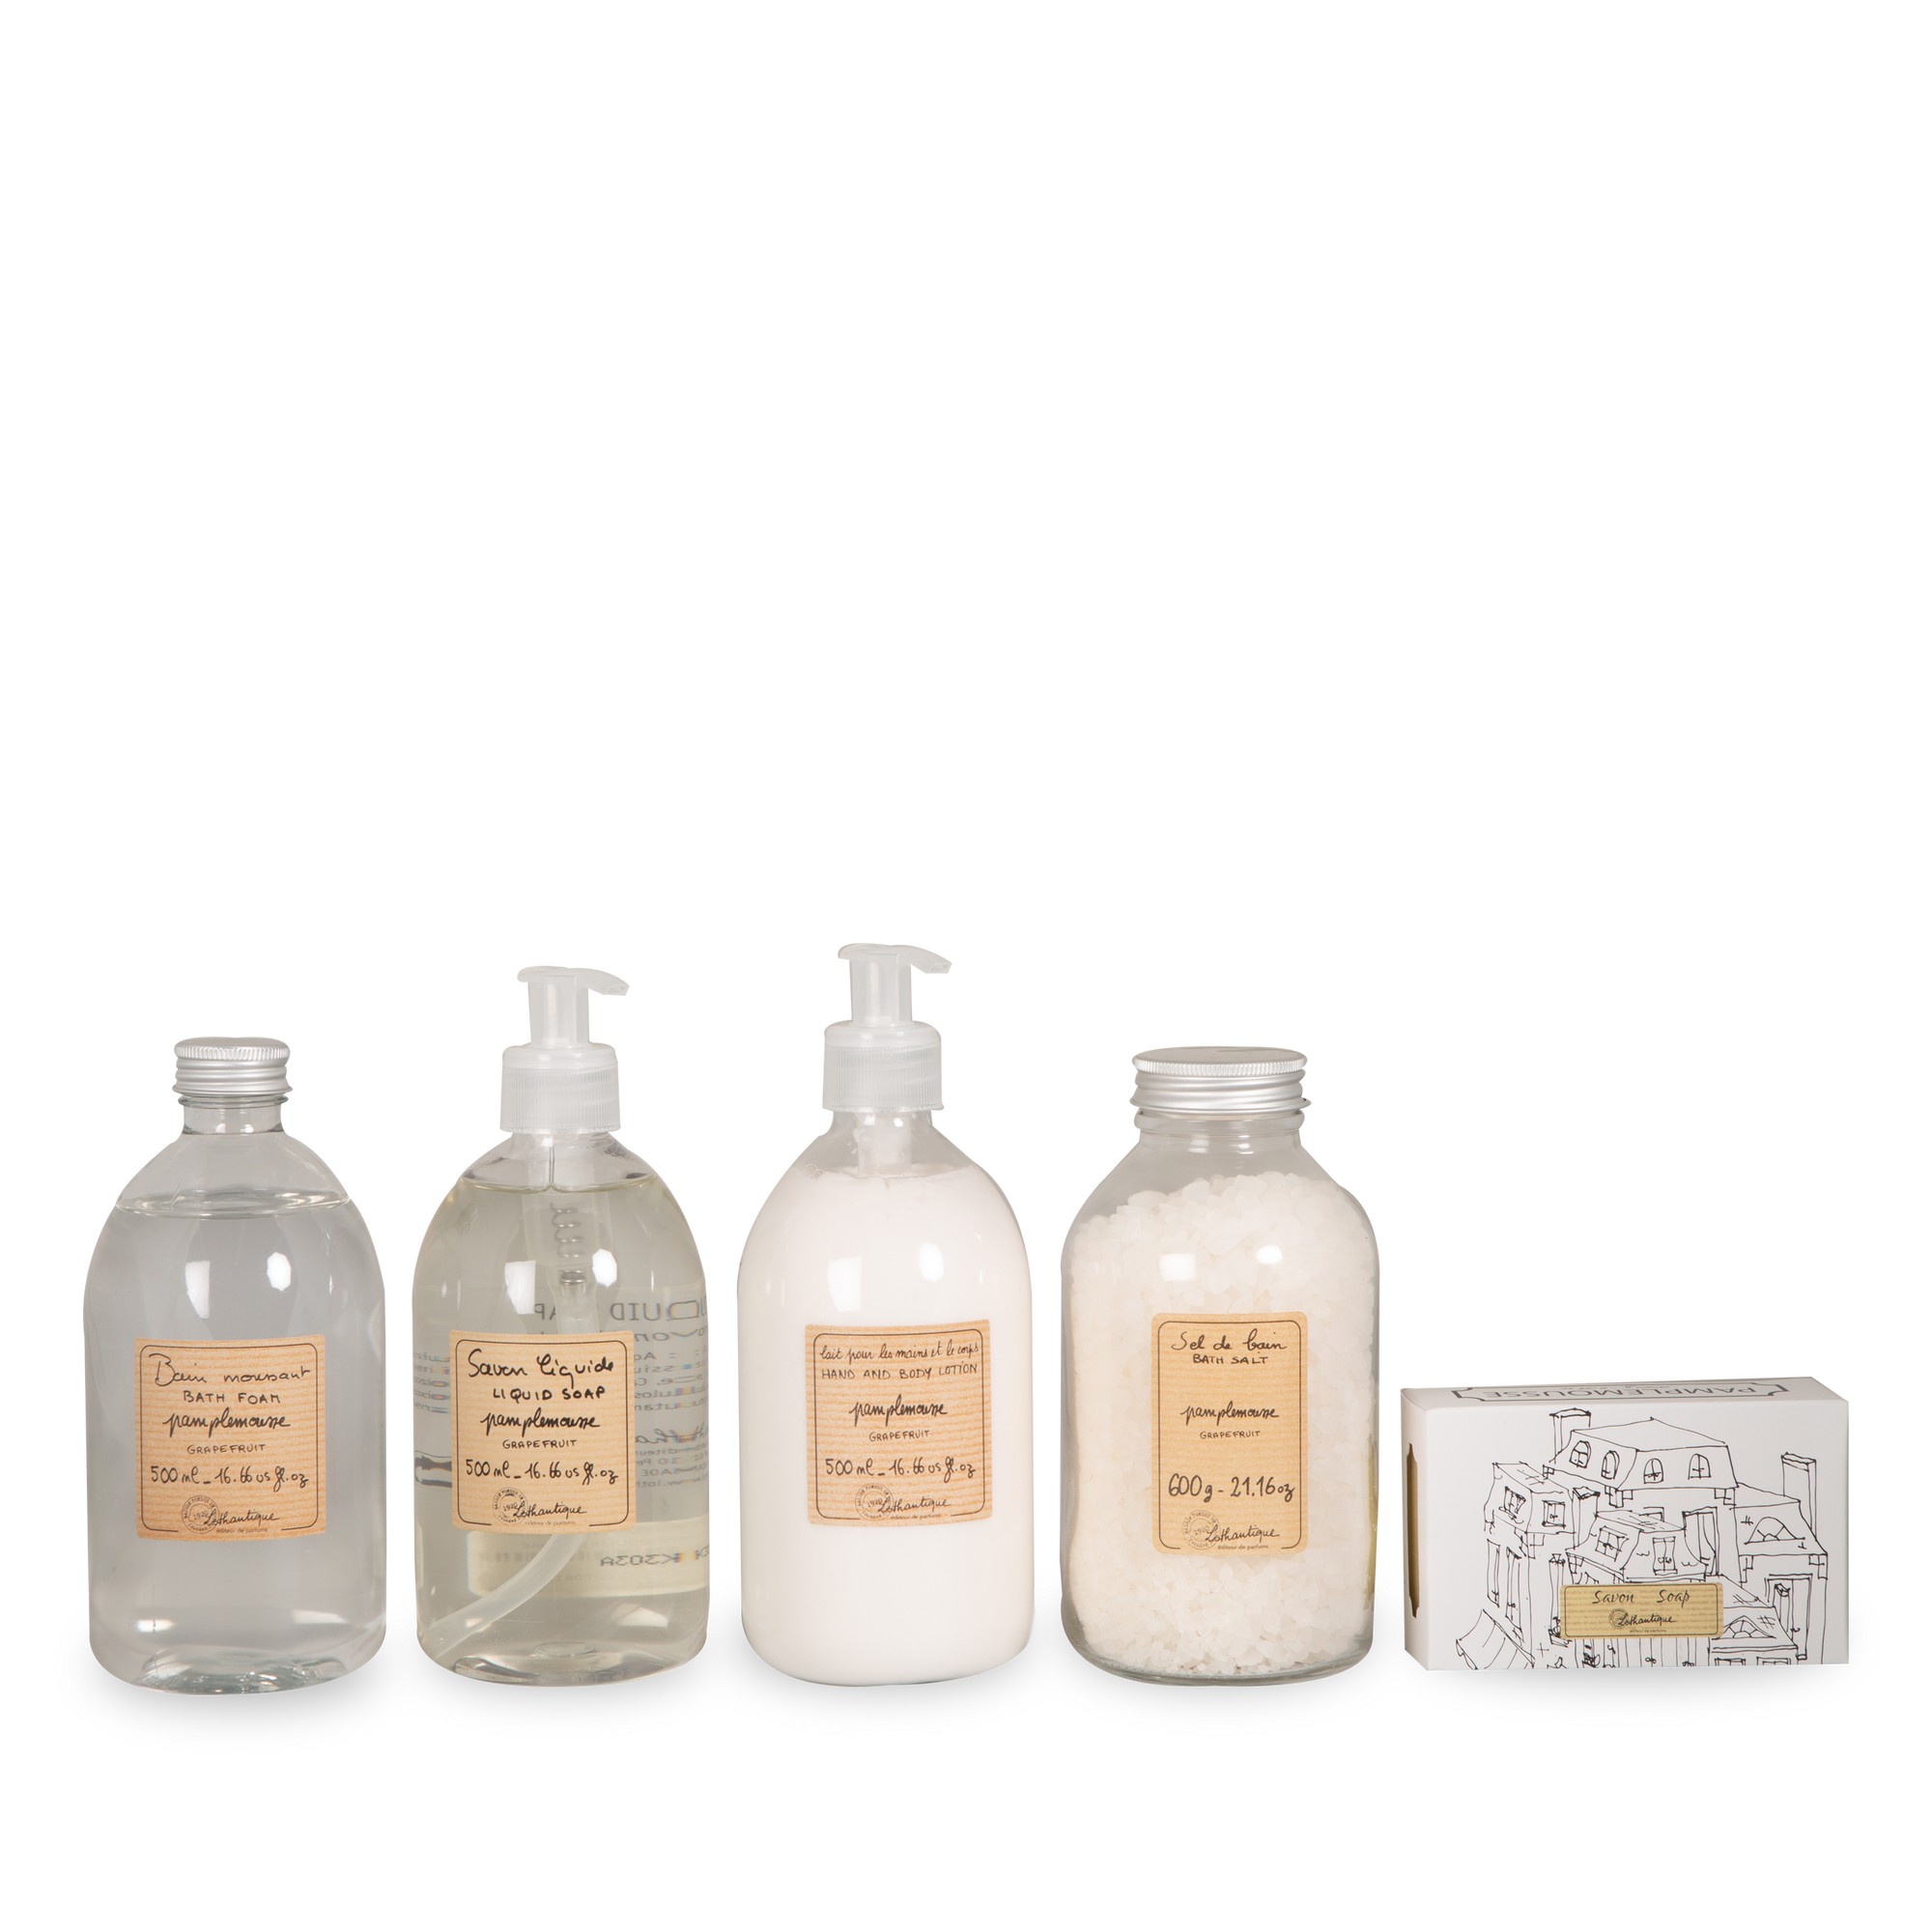 Selecting only the finest ingredients from across the world, Lothantique's range of products includes luxurious bath, beauty and home fragrance products.